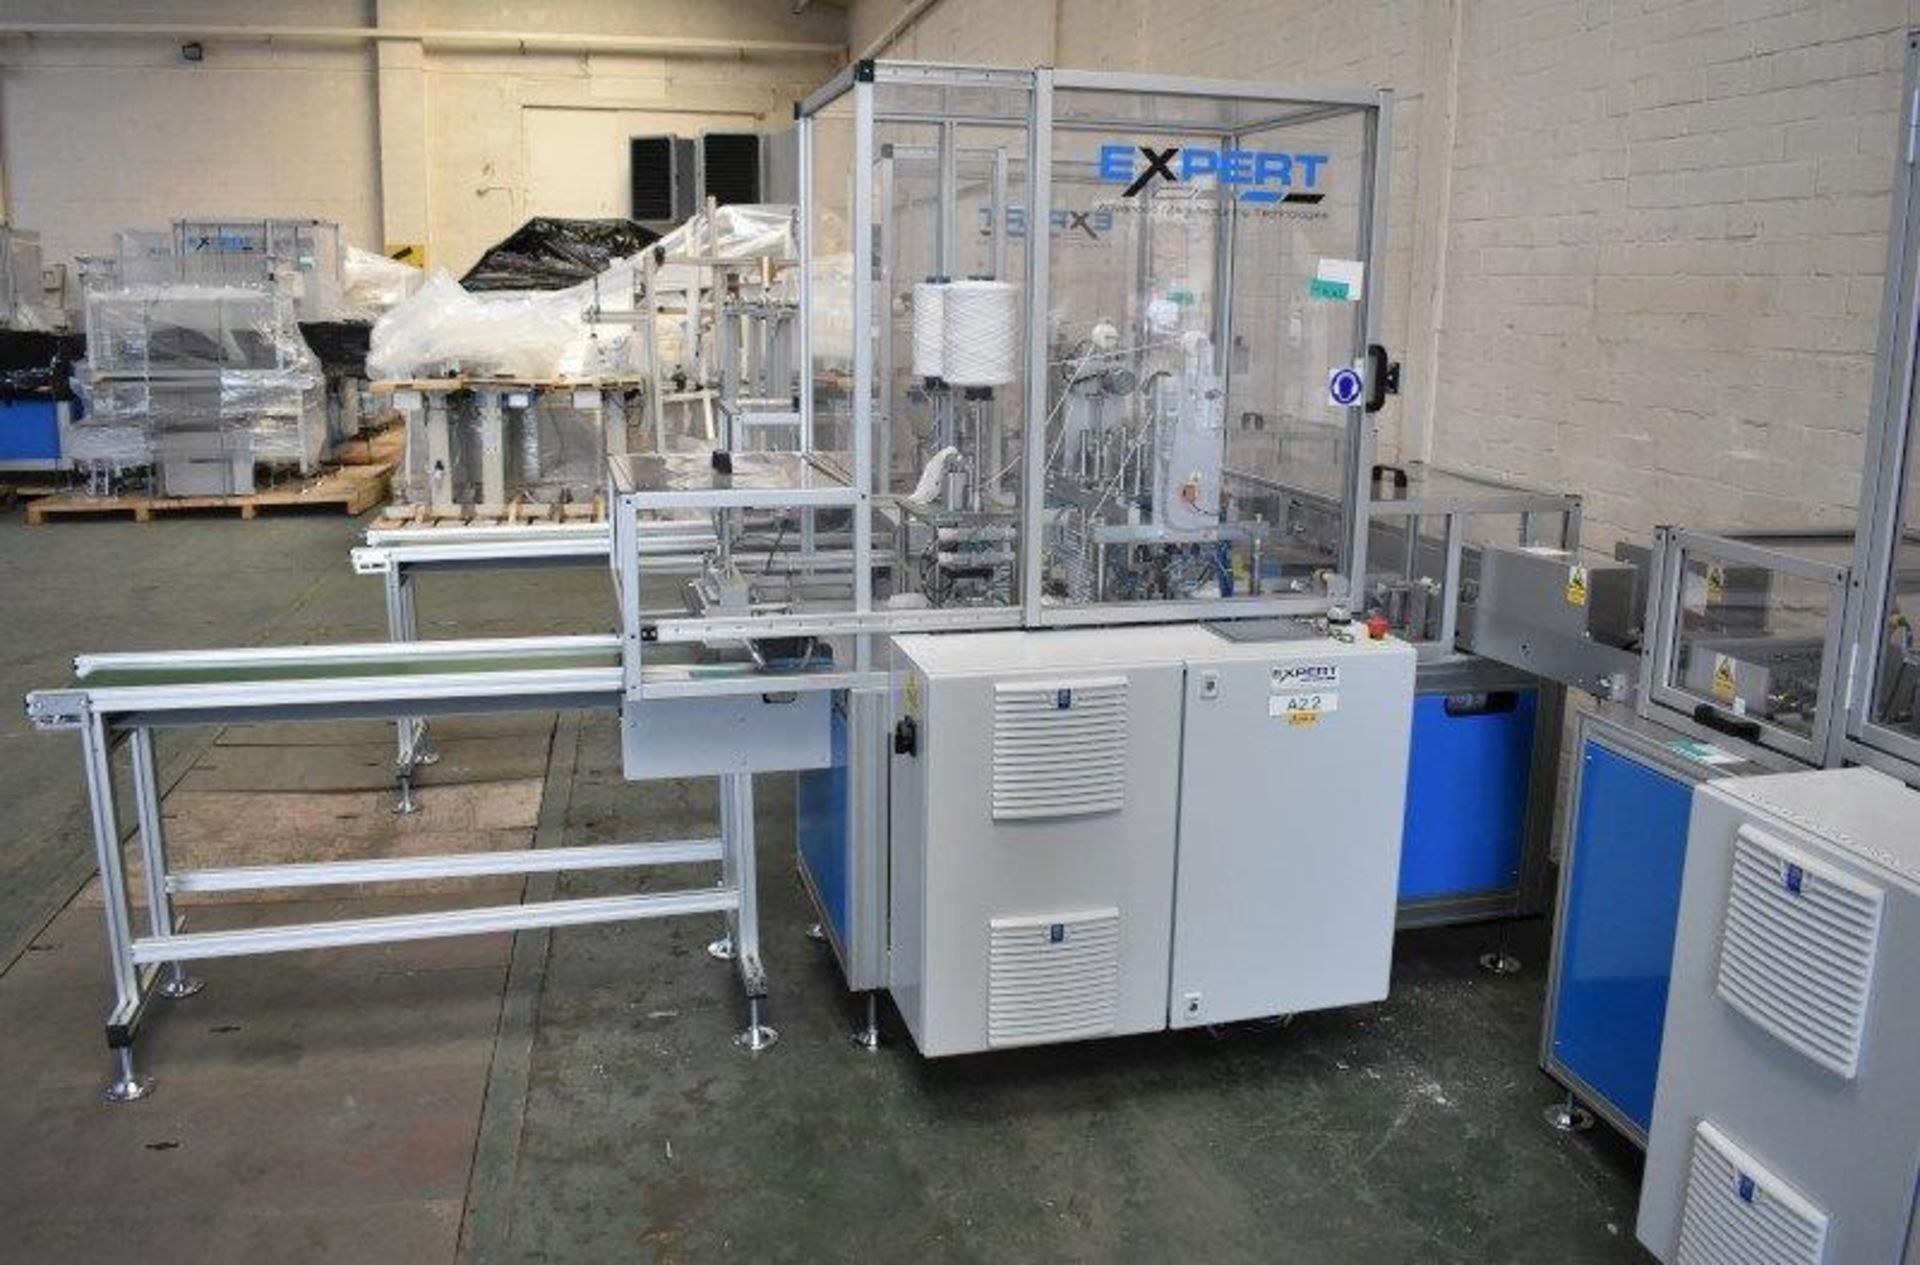 Expert fully automated Mask Making Machine - manufactured in 2020. - Image 6 of 20